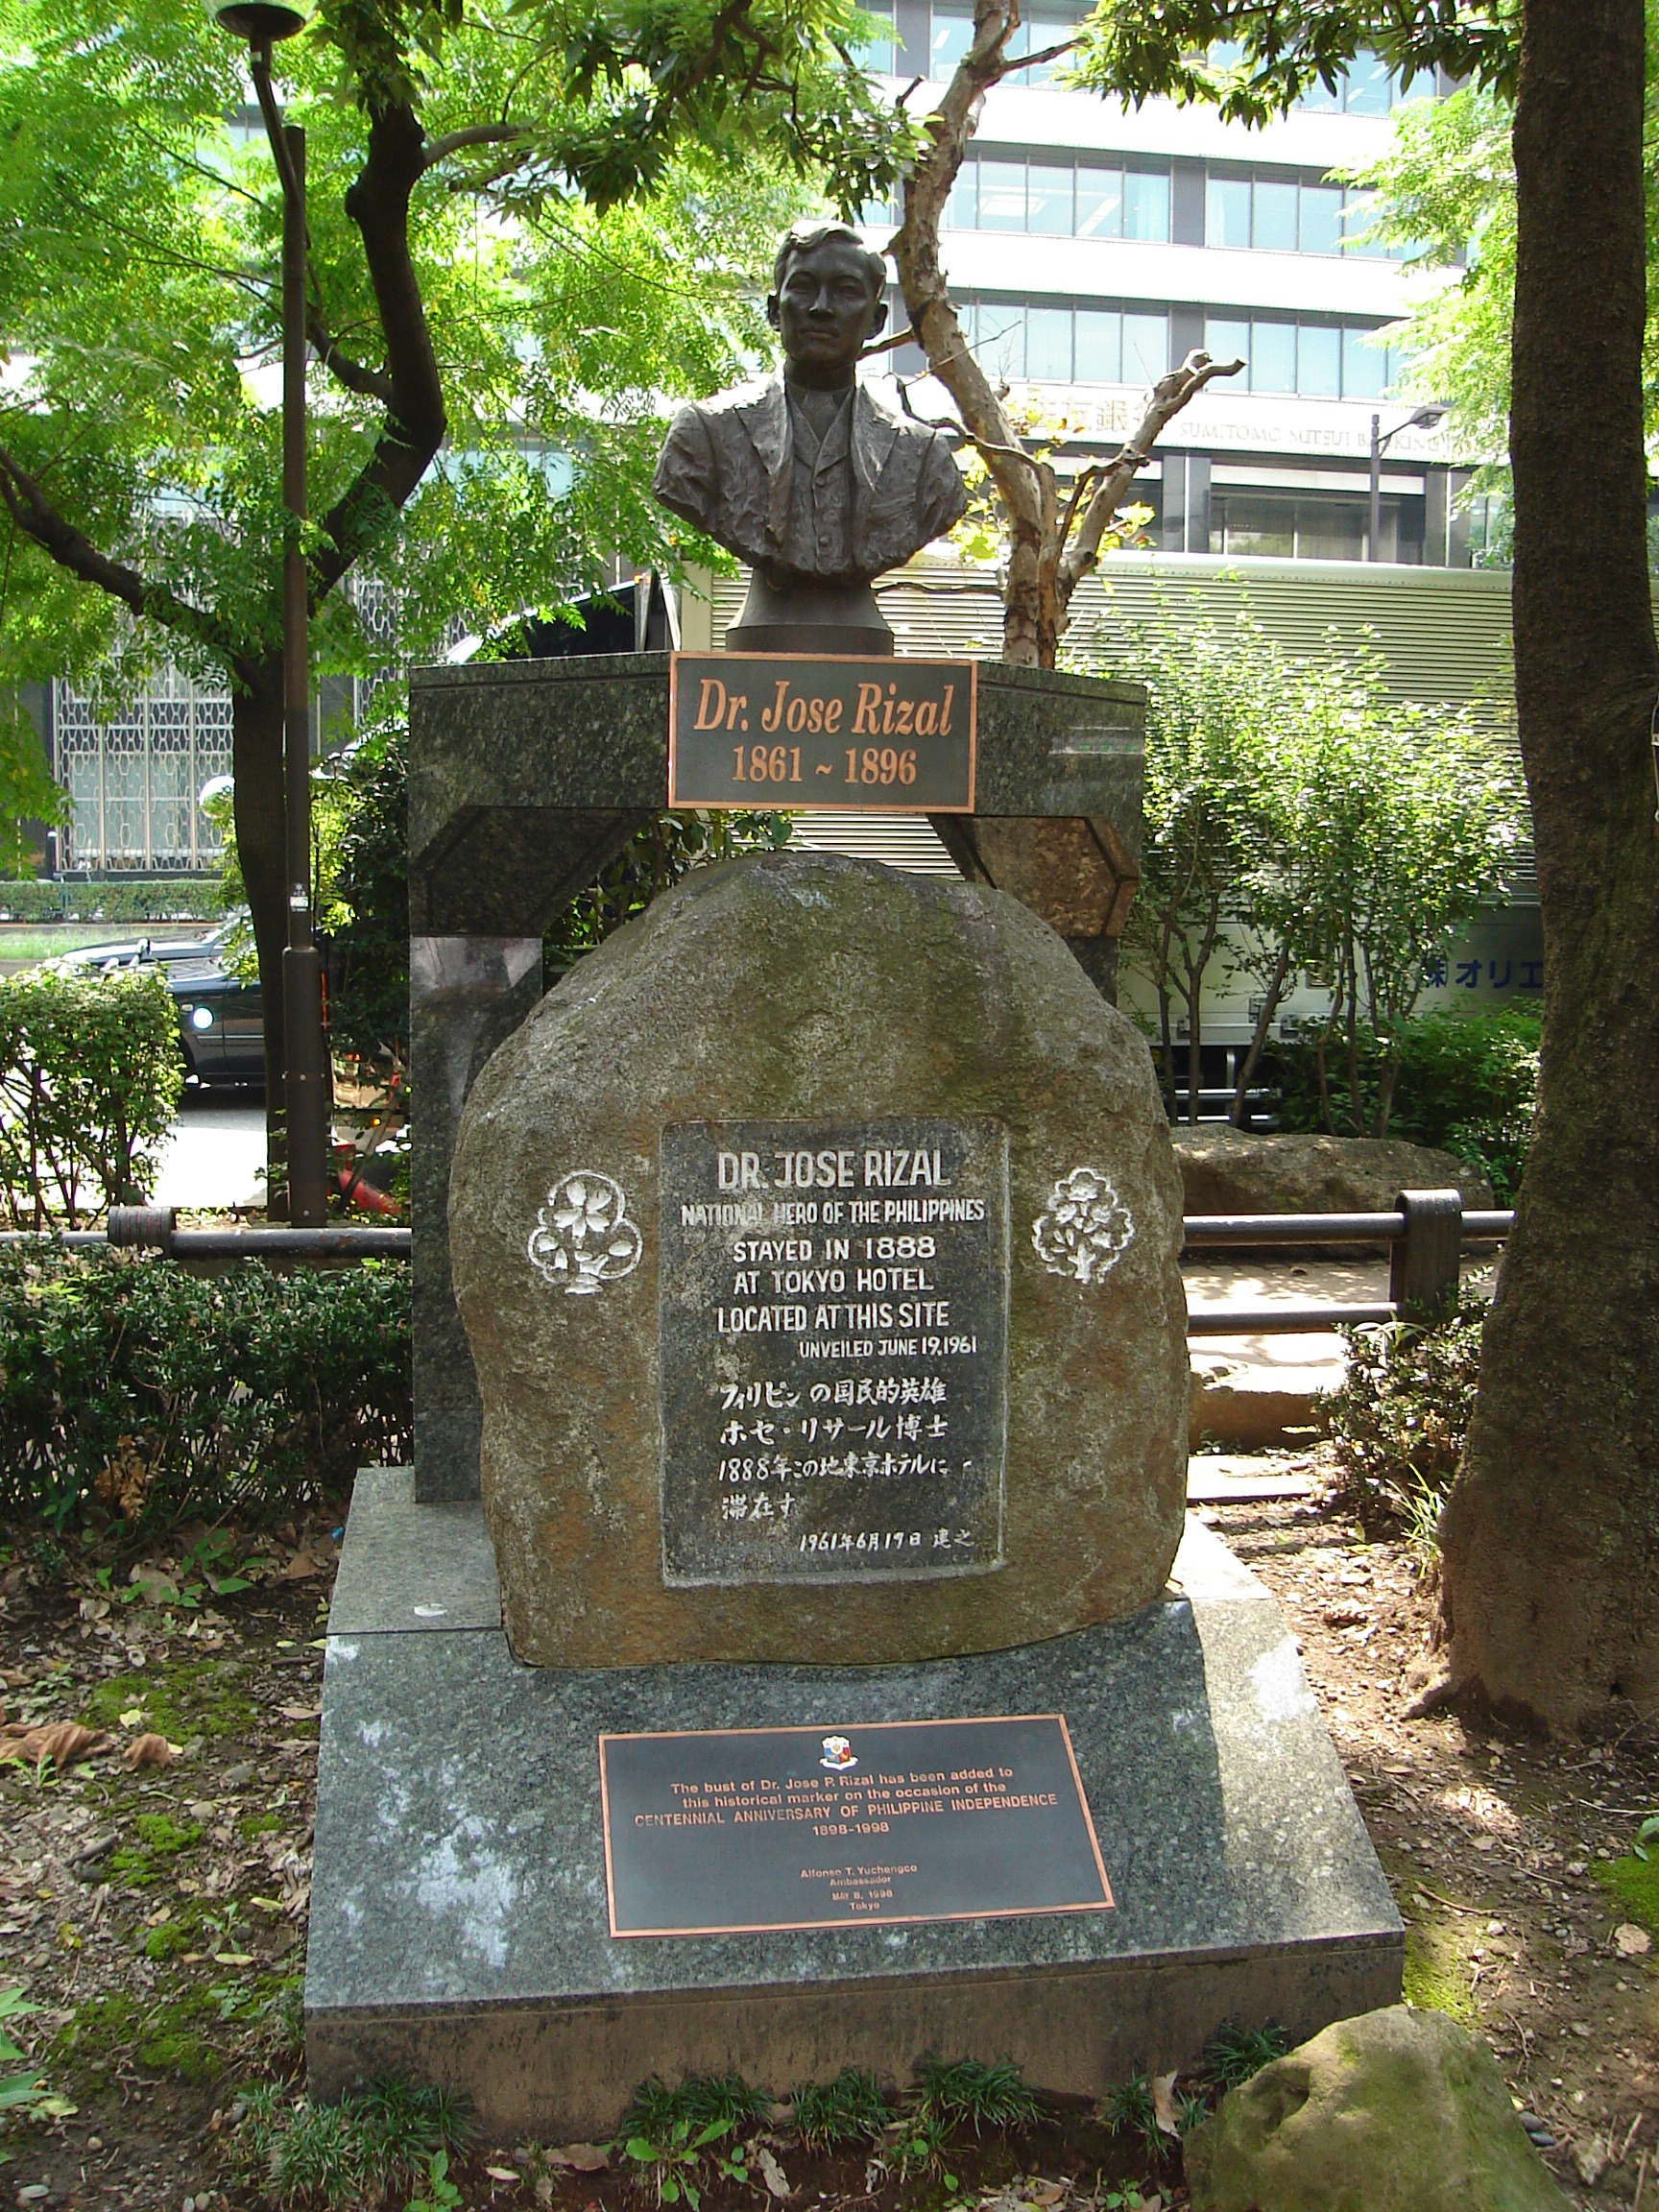 a bust of Dr. Jose Rizal 1861-1896 national hero of the phillipines